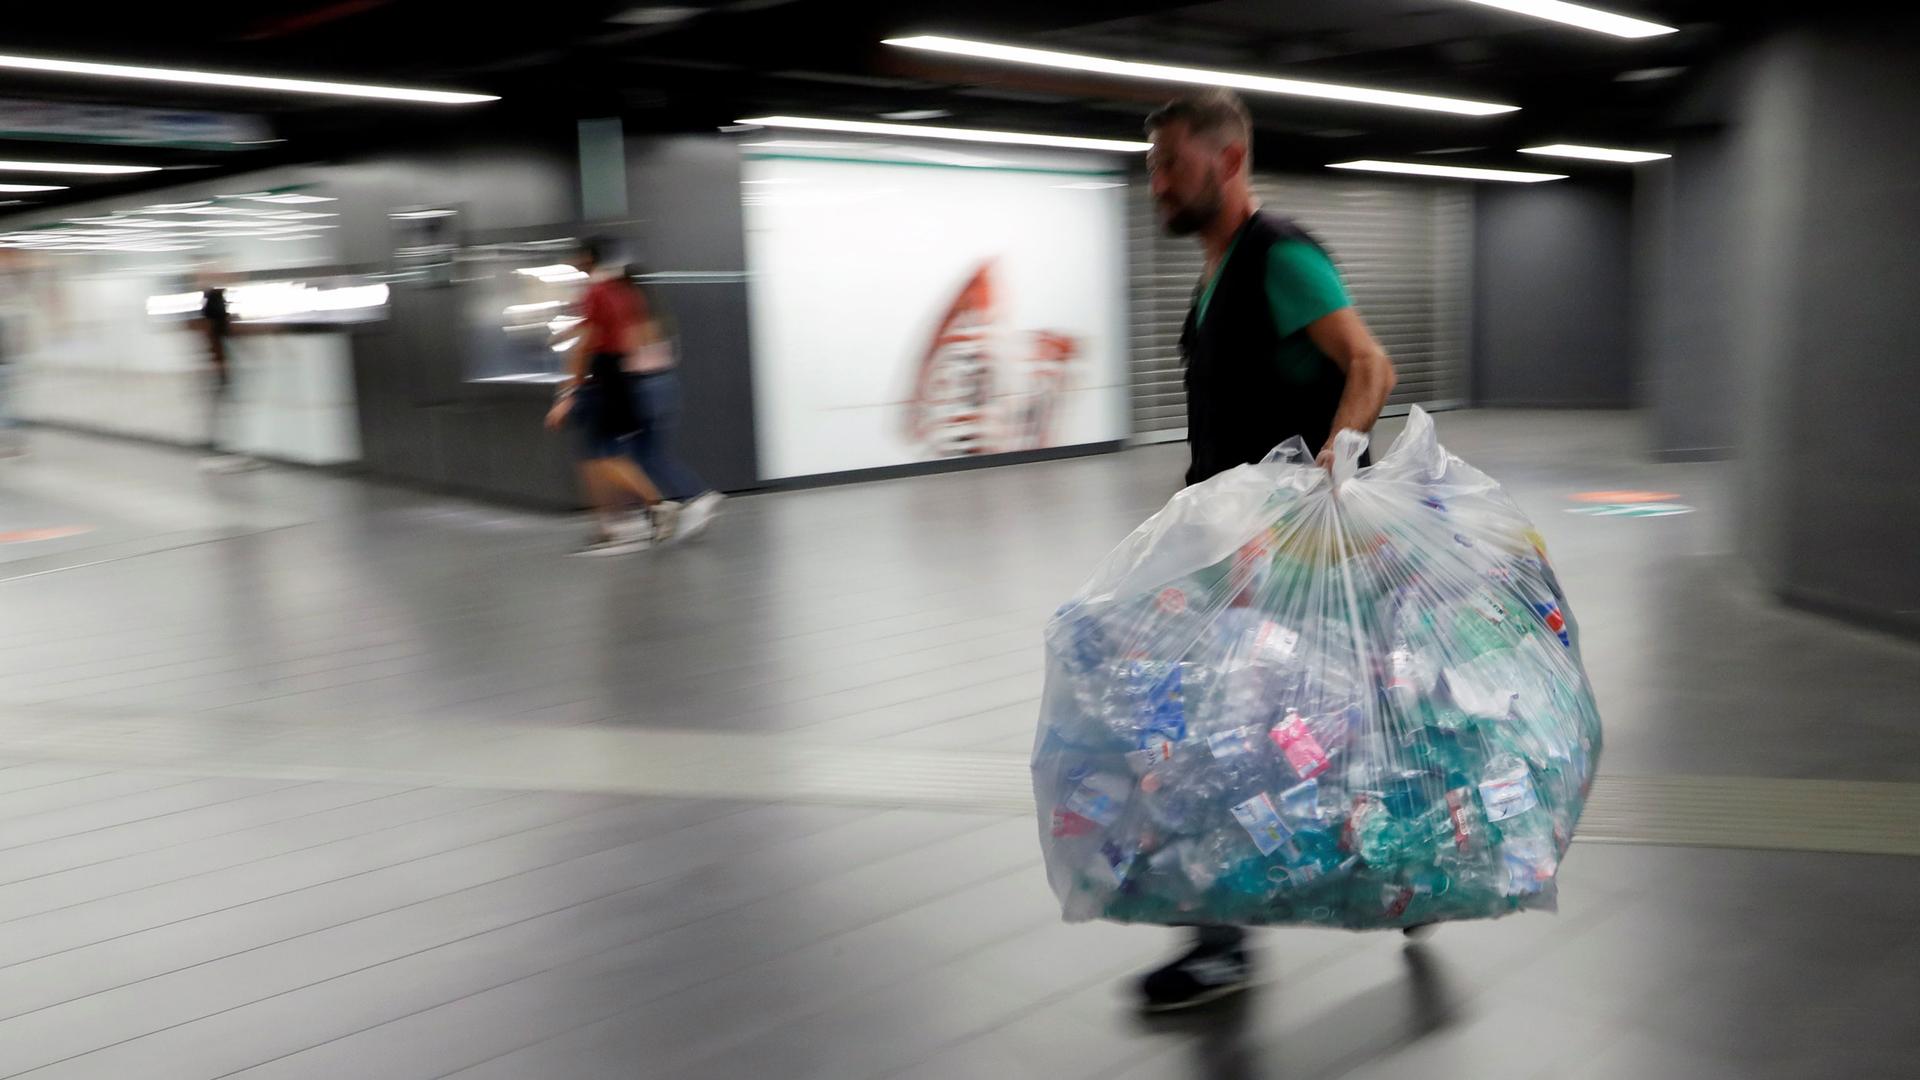 A man is shown wearing a dark-color vest and carrying a large garbage bag full of plastic bottles.